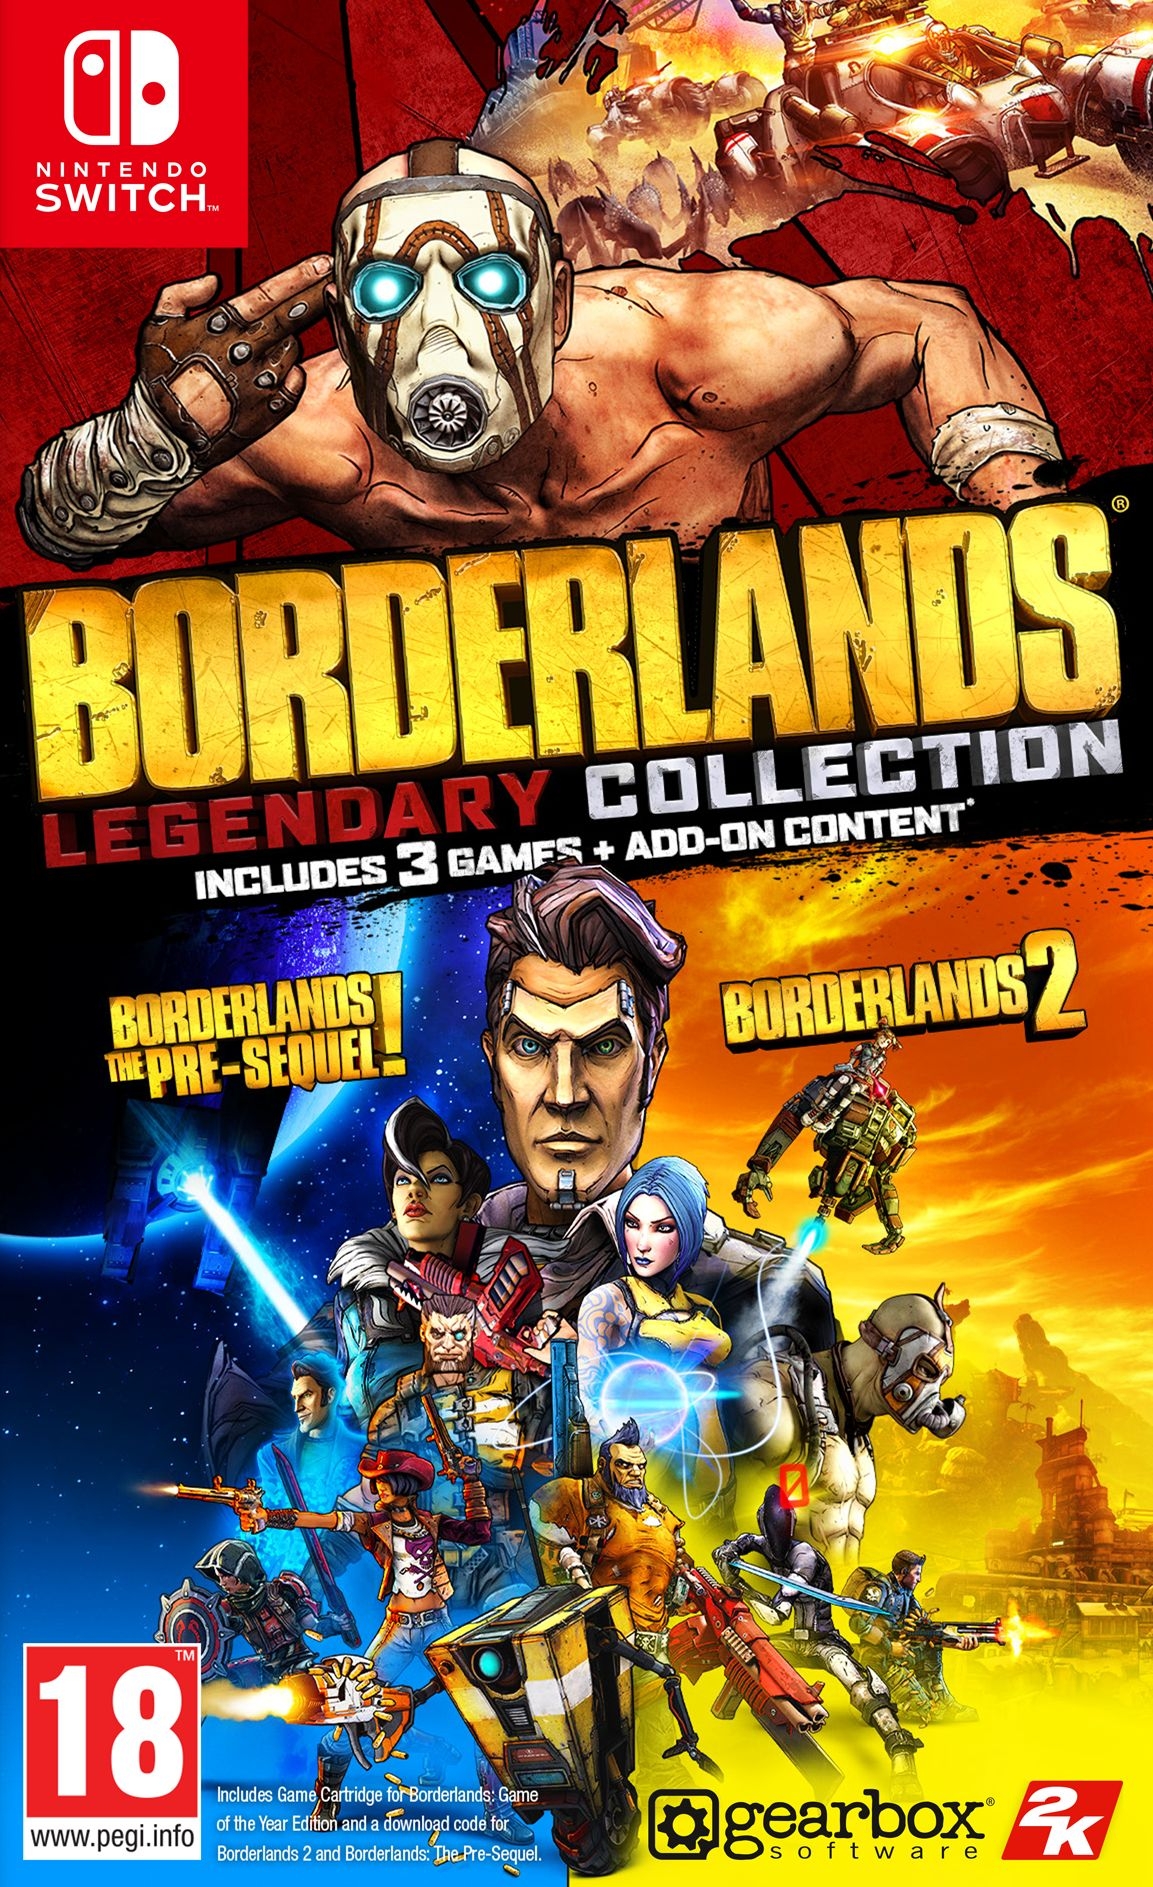 Switch Borderlands Legendary Collection